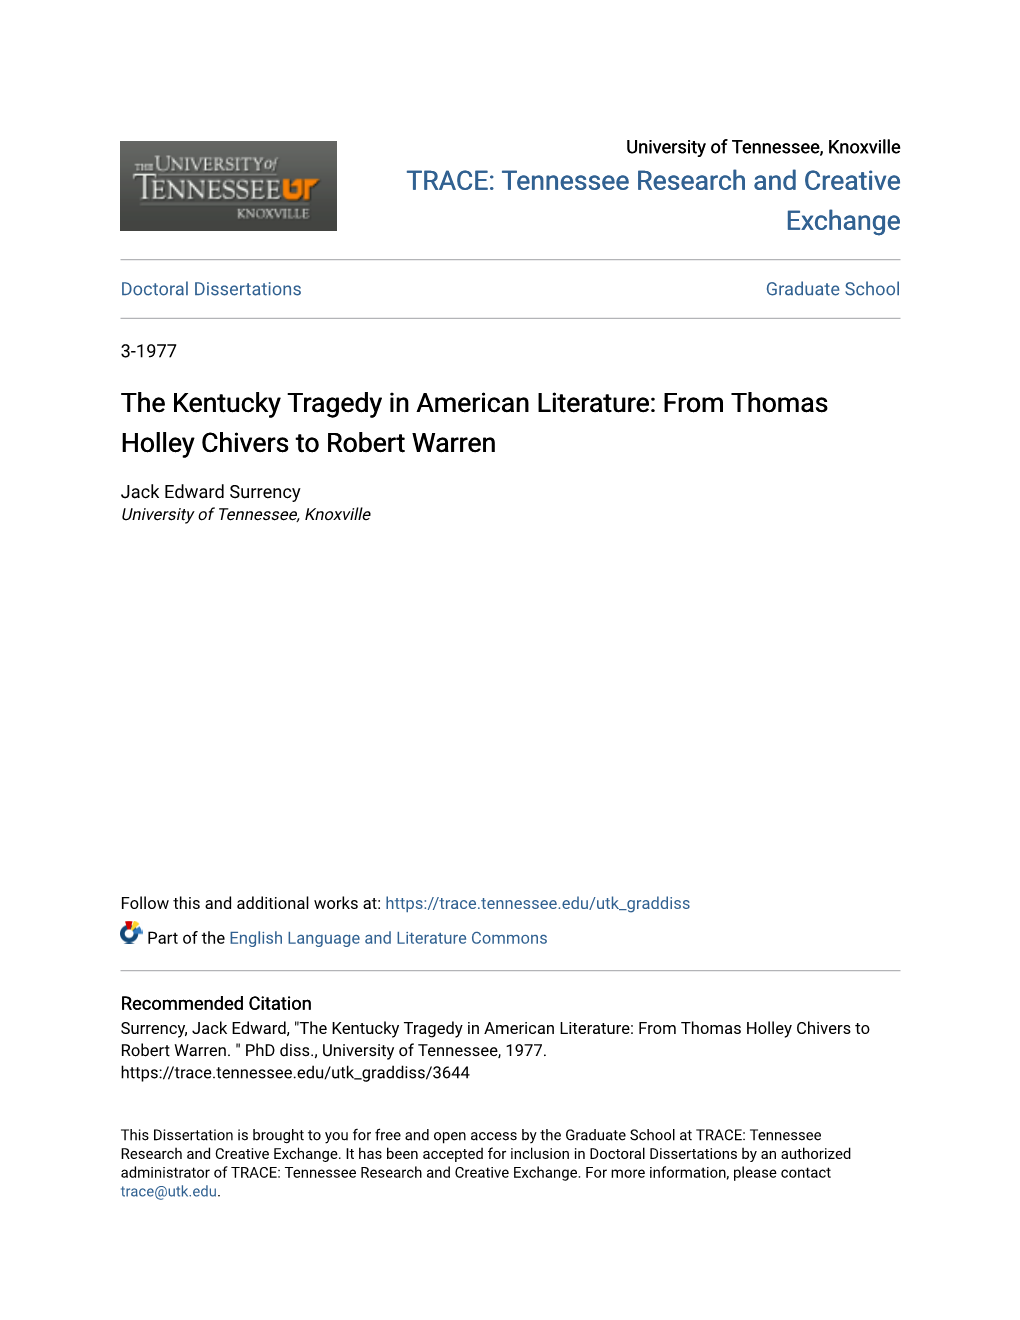 The Kentucky Tragedy in American Literature: from Thomas Holley Chivers to Robert Warren